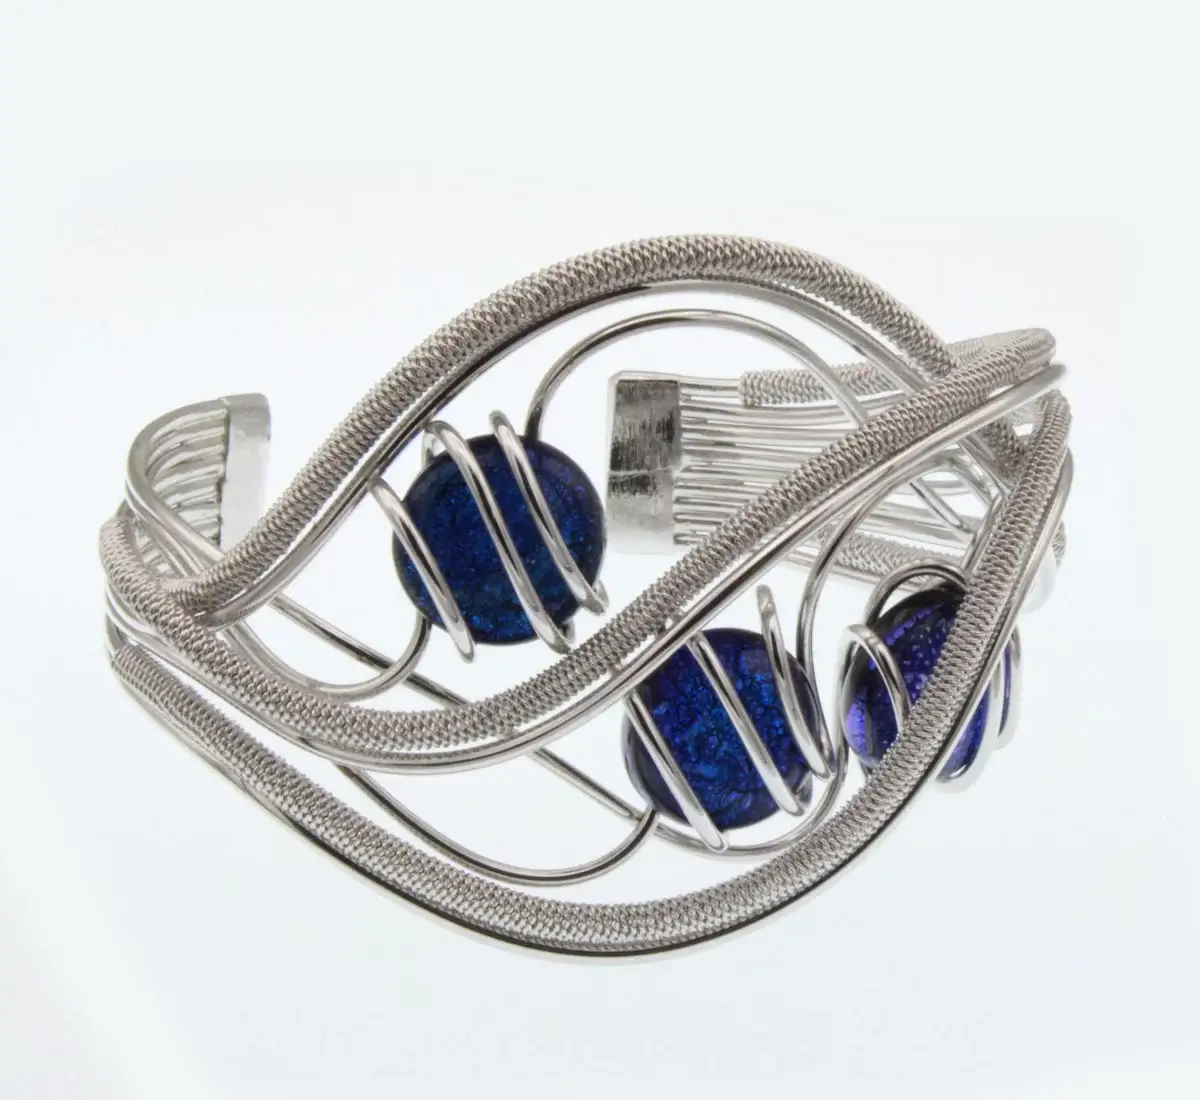 silver tone cuff bracelet in wrapped wire, hand tooled rhodium in an elaborate wave design with three royal blue Murano glass beads